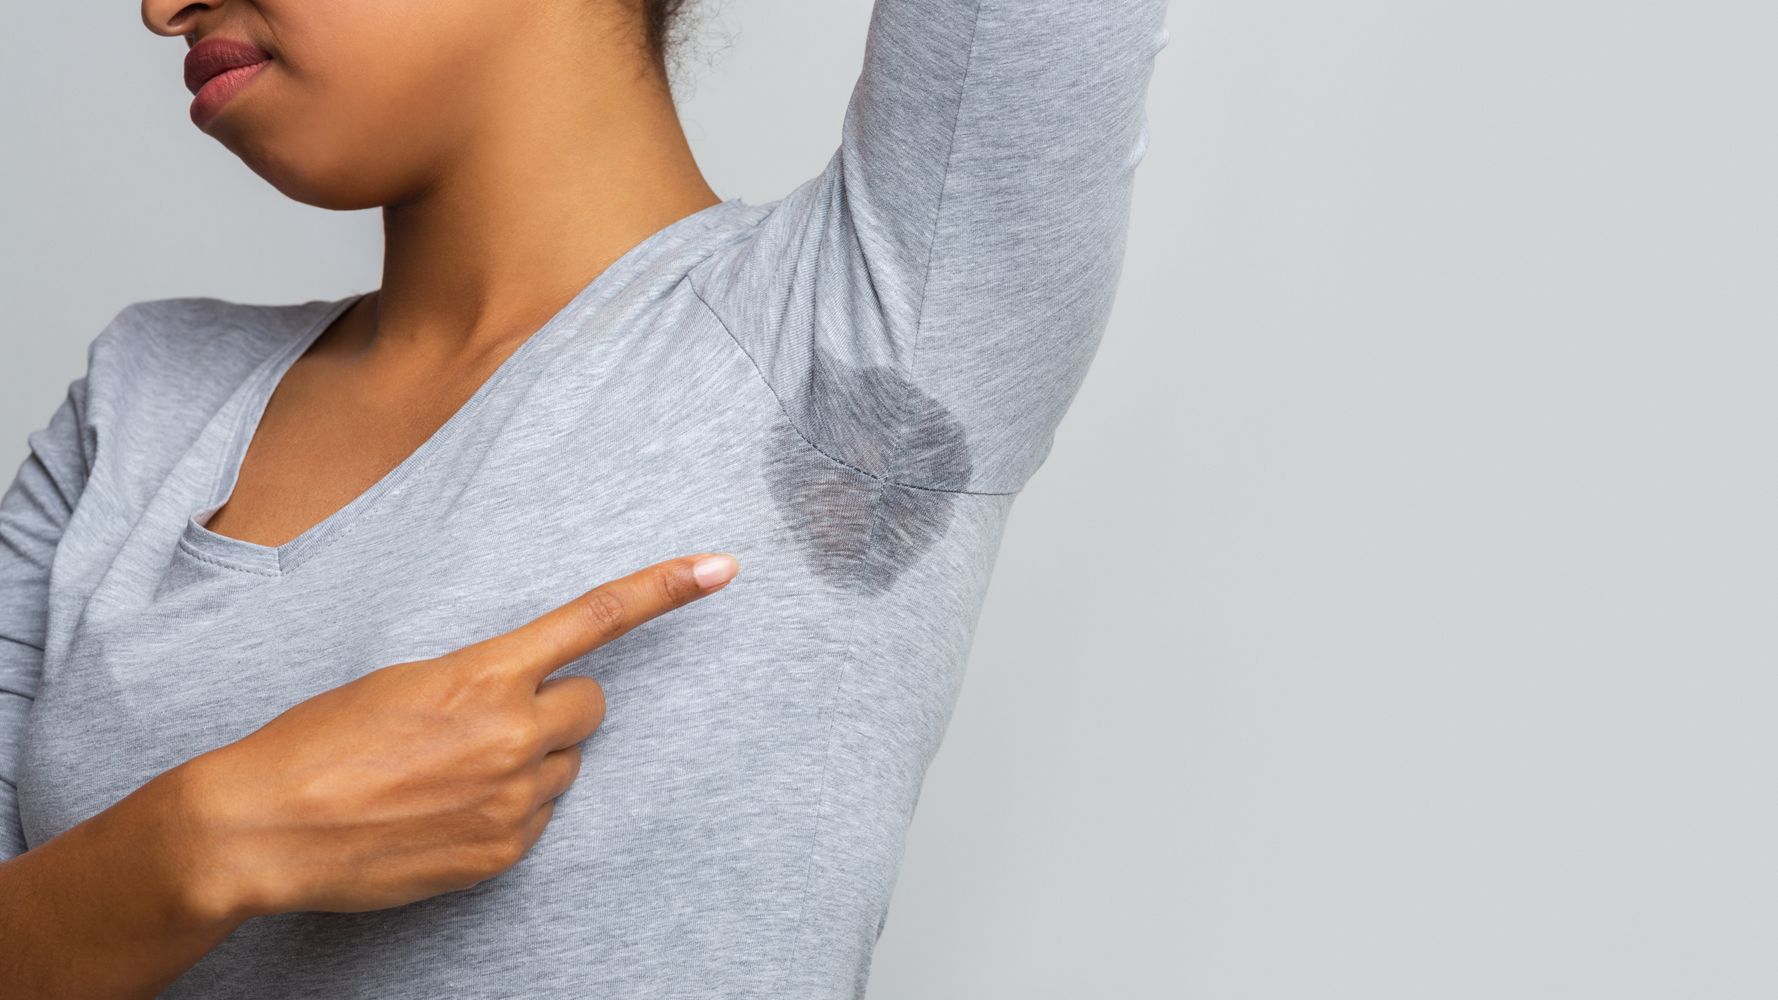 TikToker shows how to avoid sweat stains by using pantyliners